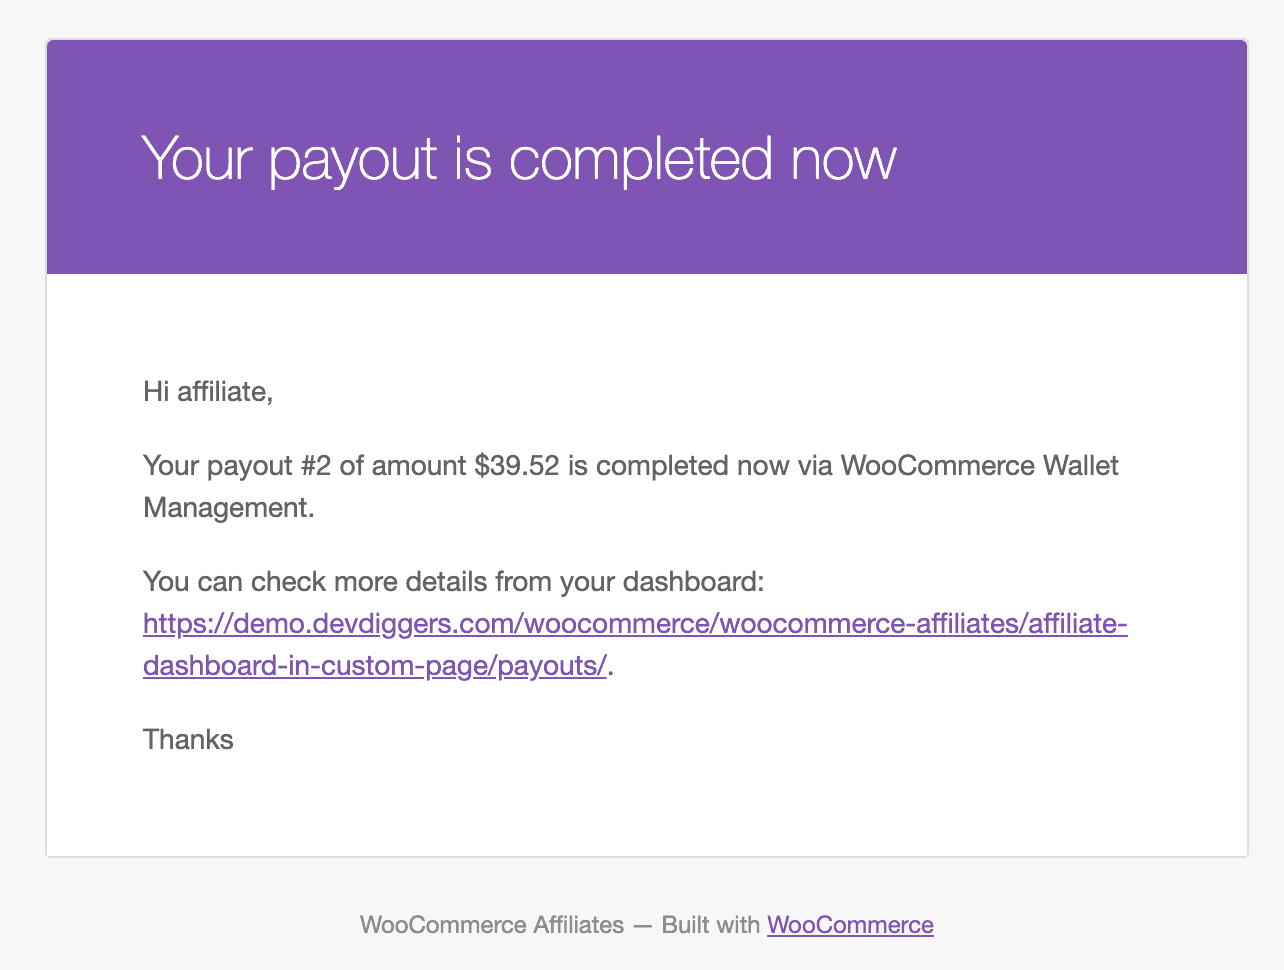 Affiliates for WooCommerce Payout Completed Email Notification